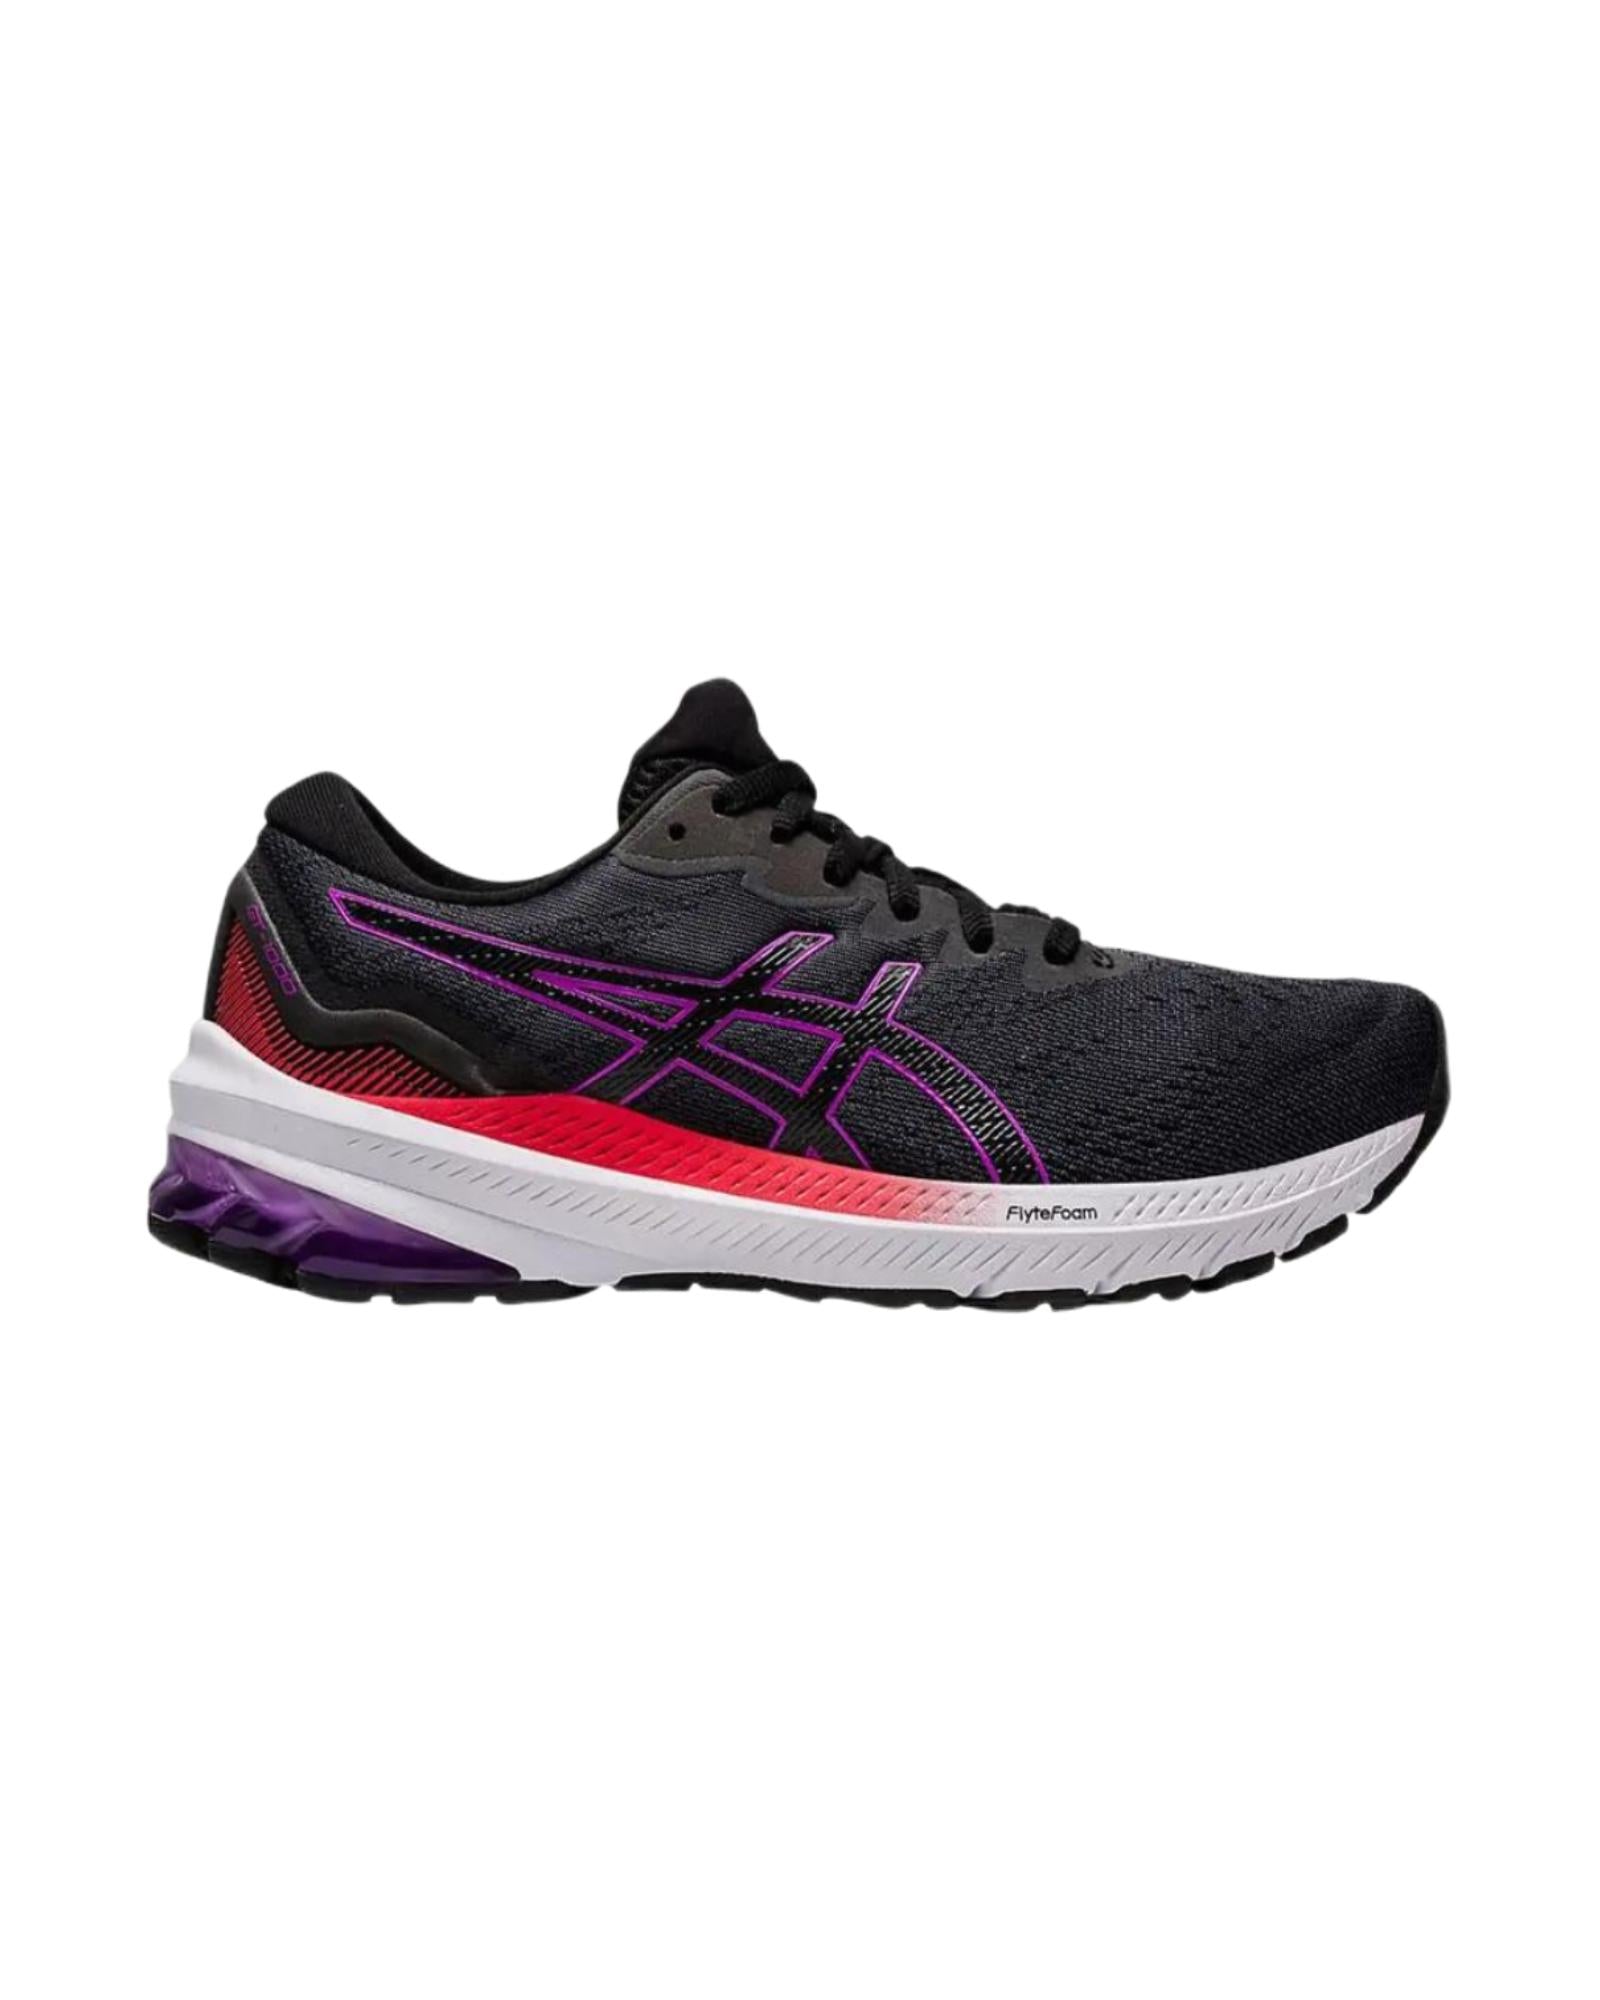 Soft and Smooth Running Shoe with Cushioning Technology - 6 US